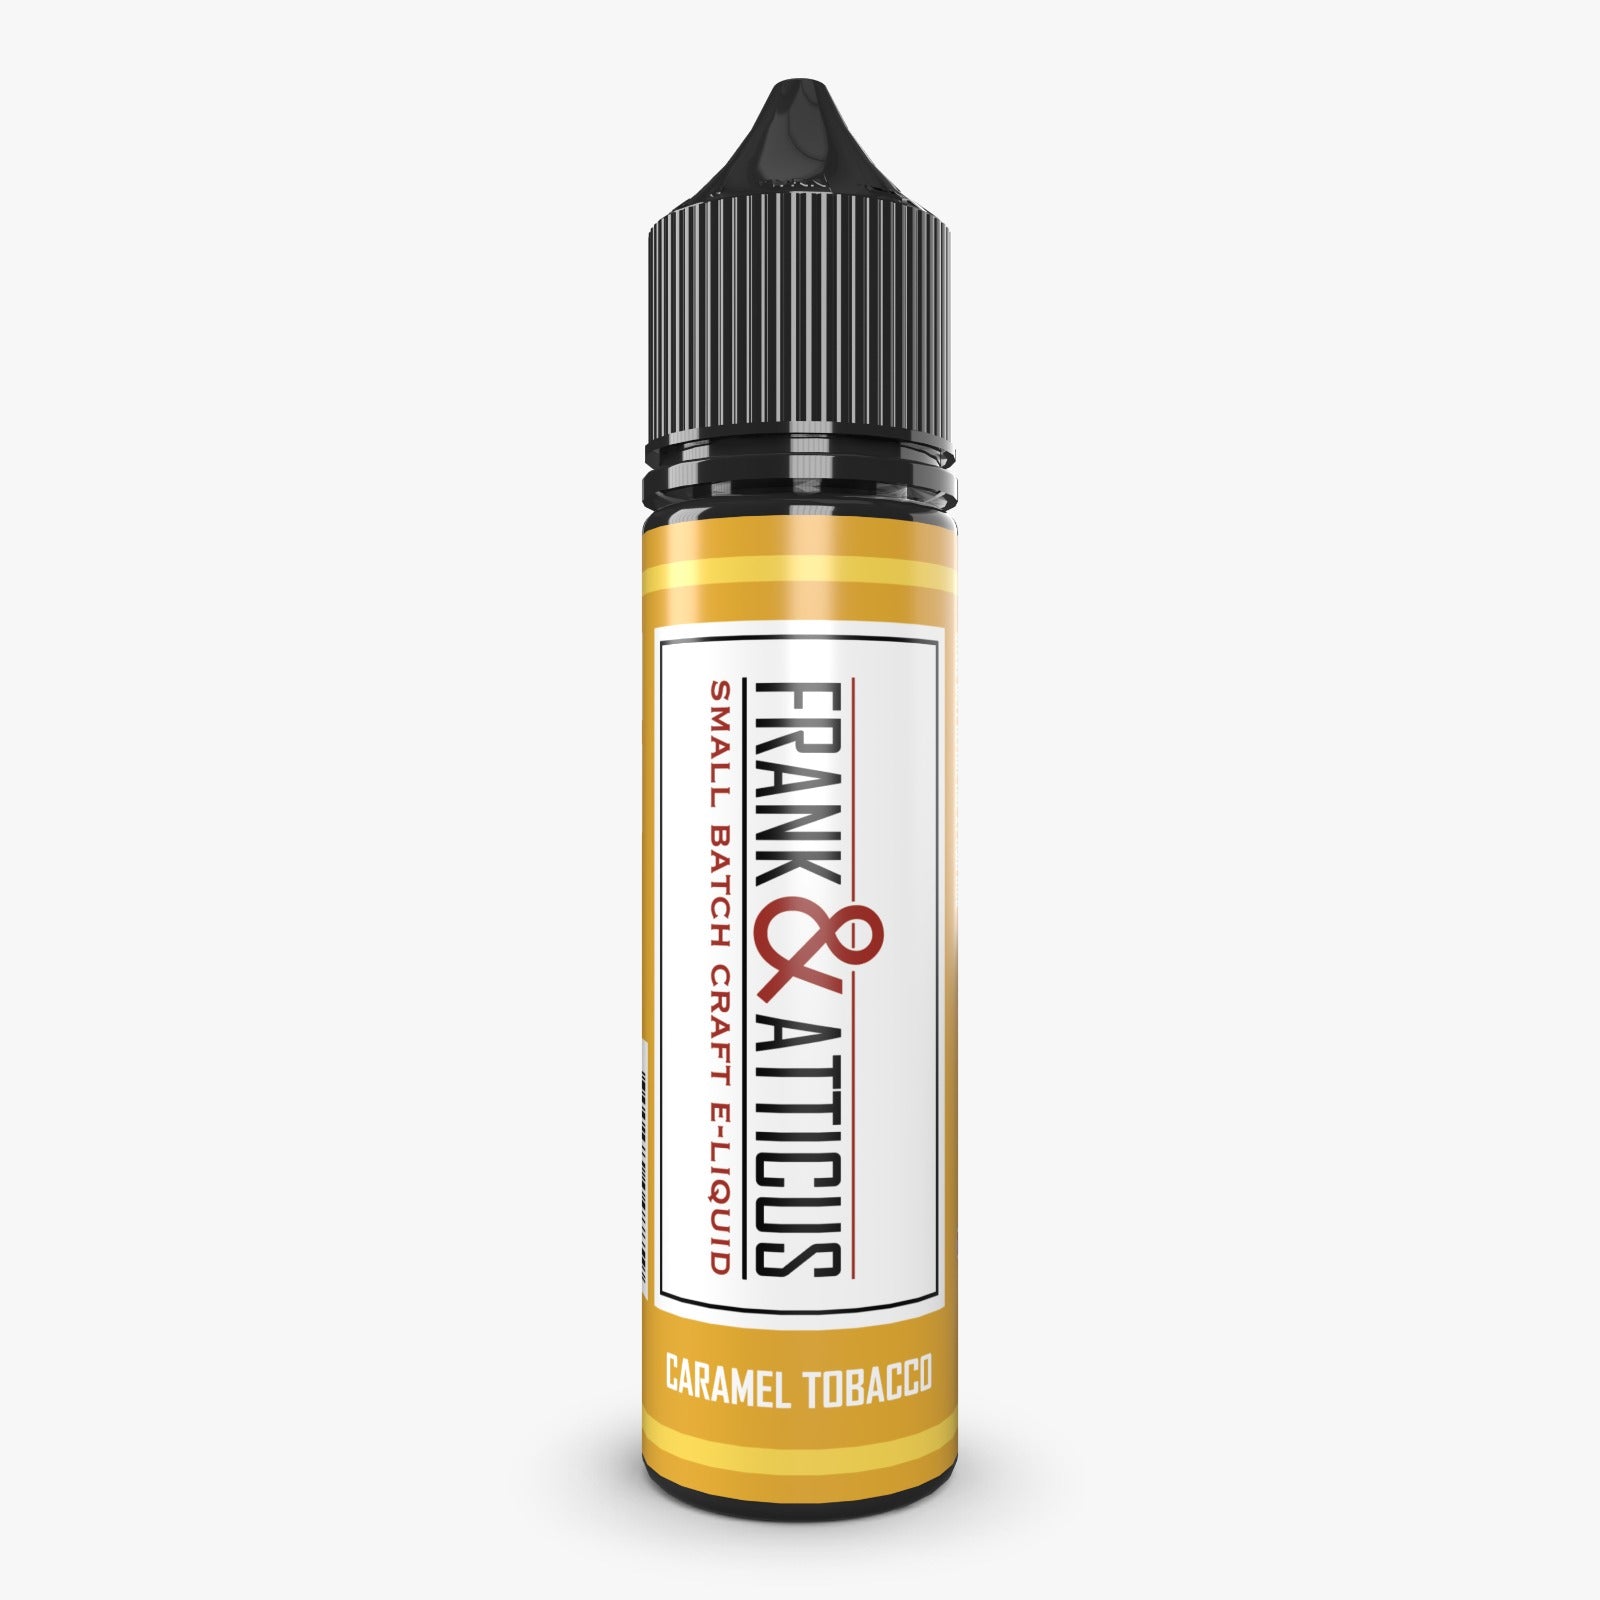 Buy Caramel Tobacco By Frank and Atticus - Wick And Wire Co Melbourne Vape Shop, Victoria Australia